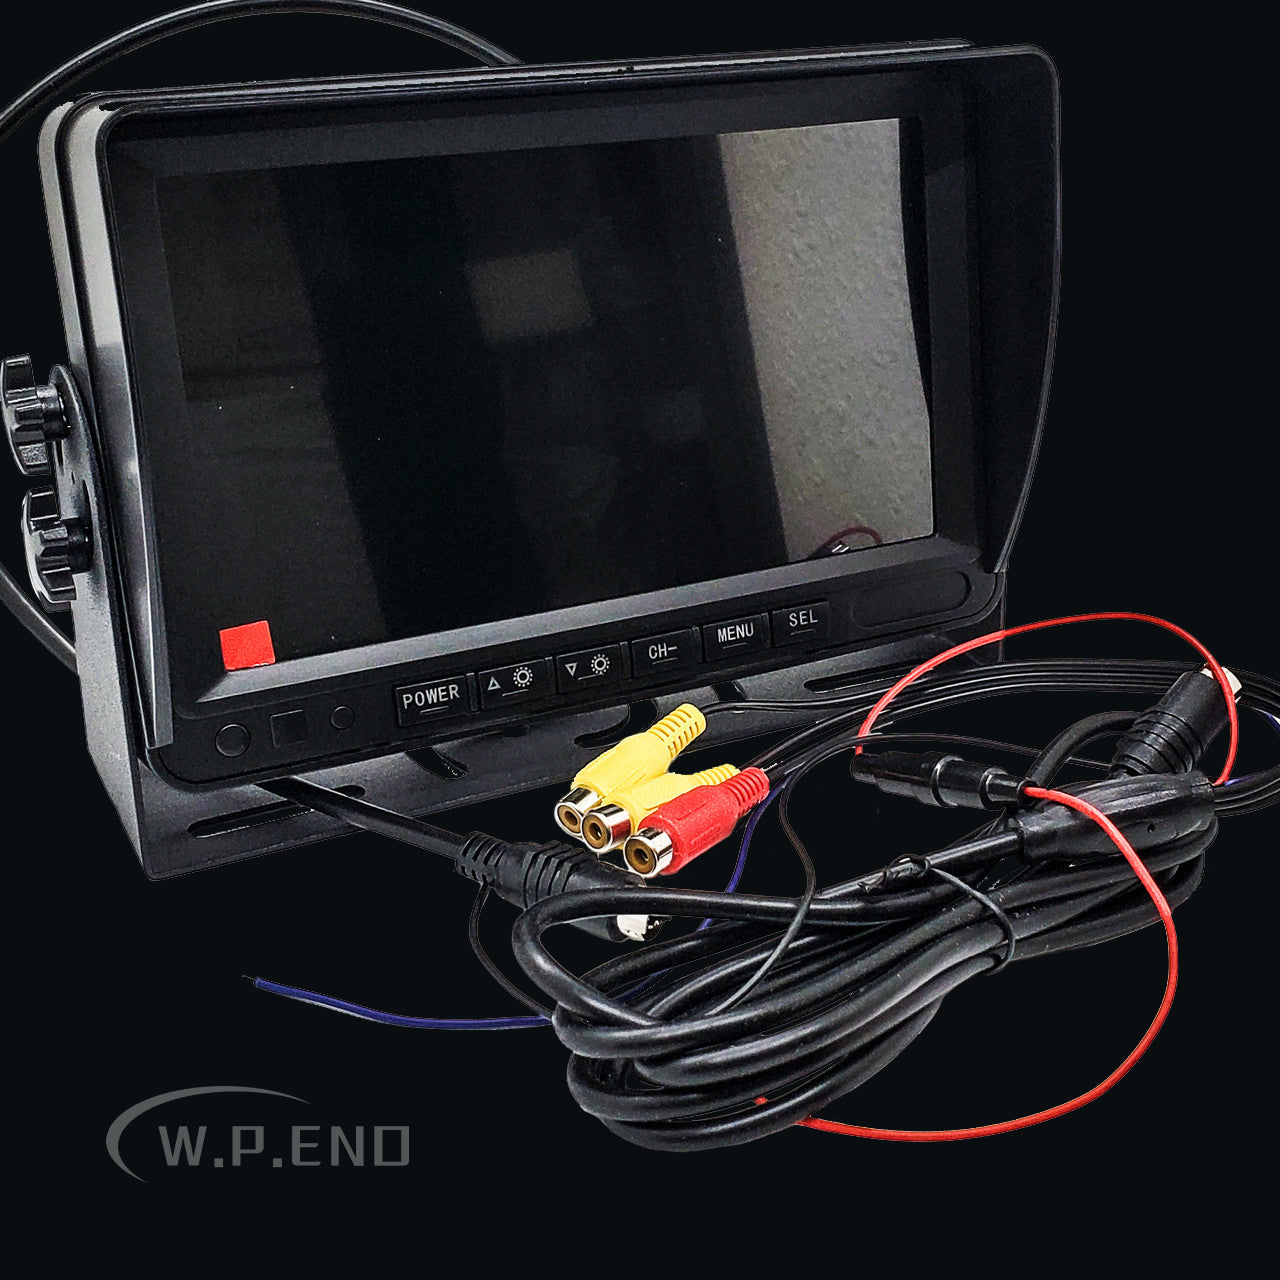 7" High Resolution TFT LCD Color Monitor 2 Video Input with Remote